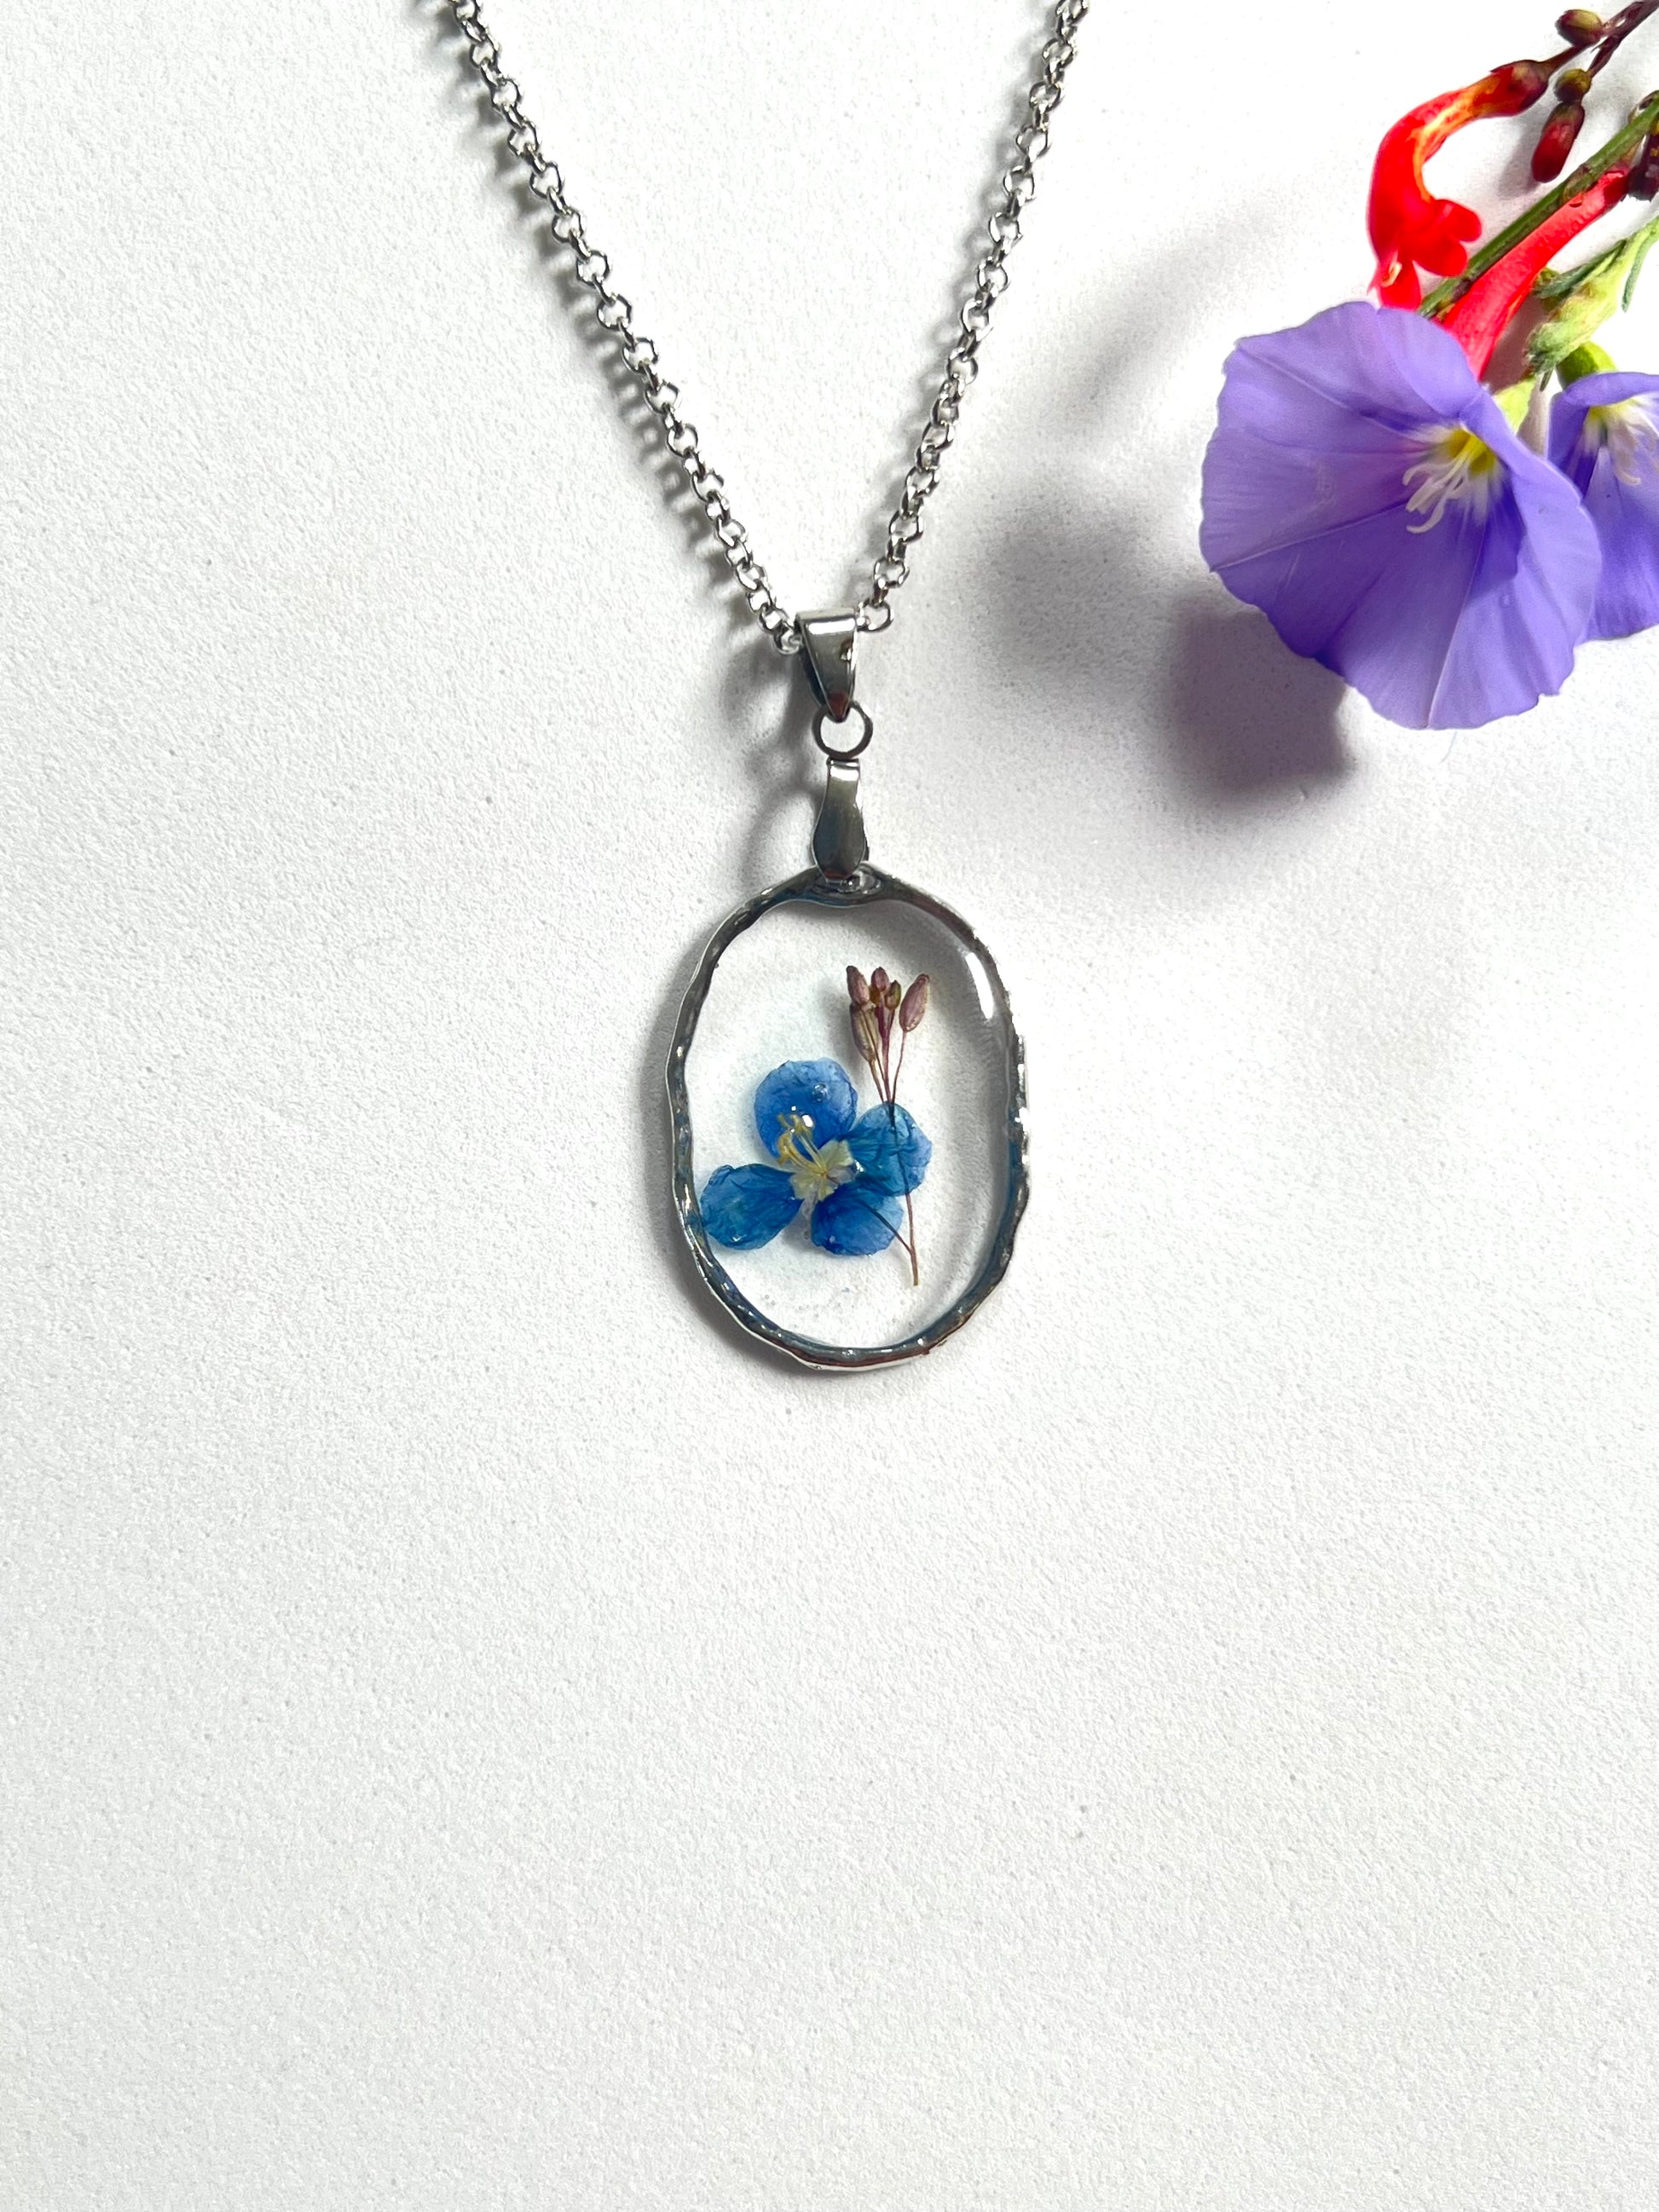 Blue Iris in silver oval necklace gift souvenir anniversary birthday